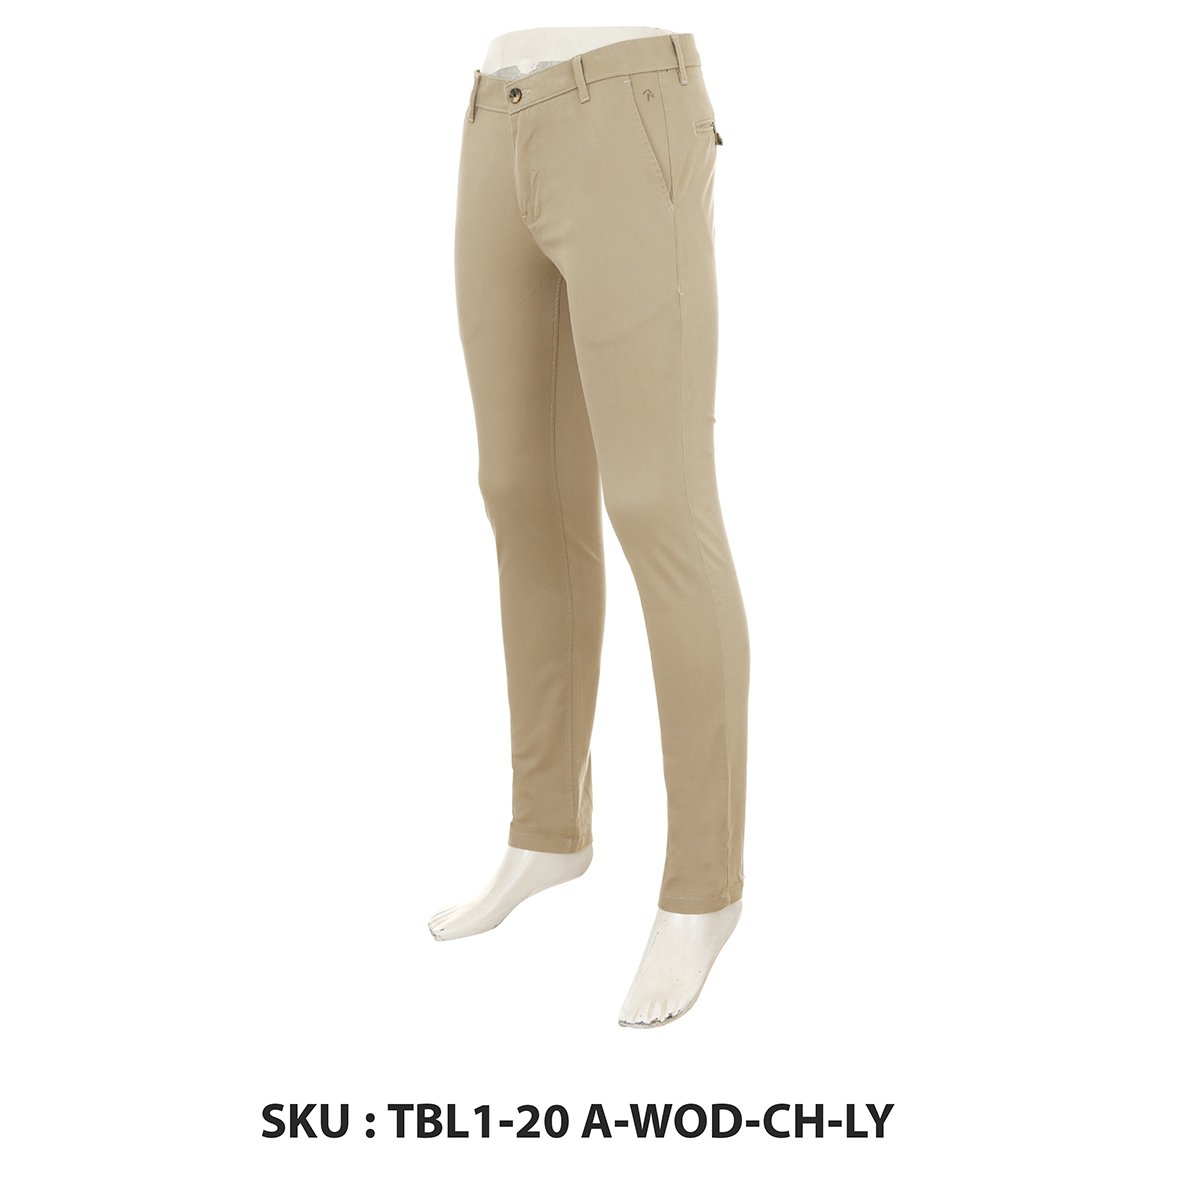 Classic Polo Mens Trousers Tbl1-20 A-Wod-Ch-Ly Wood 34